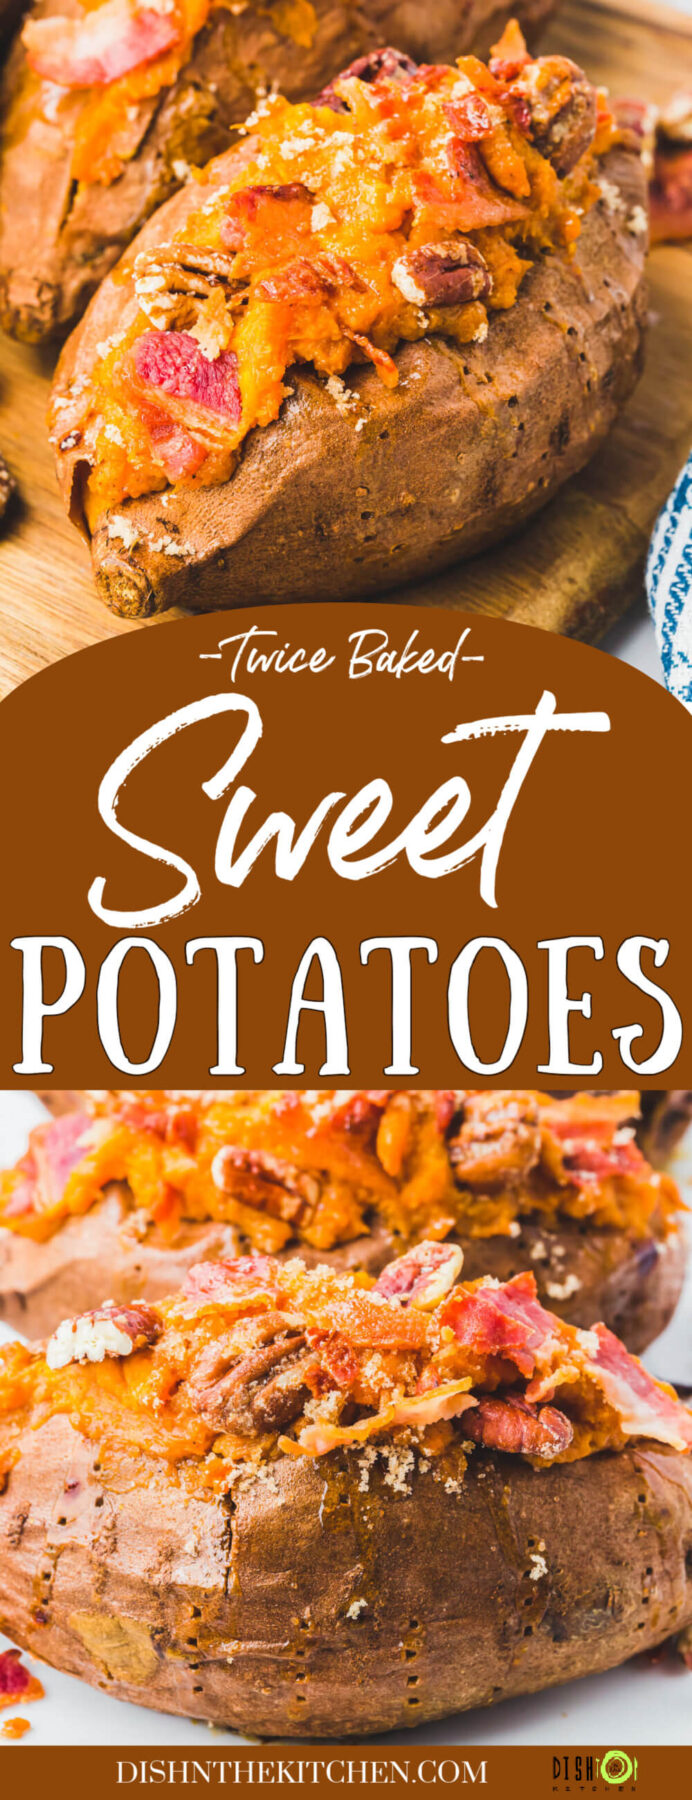 Pinterest image of Twice baked sweet potatoes topped with crispy bacon and chopped pecans.